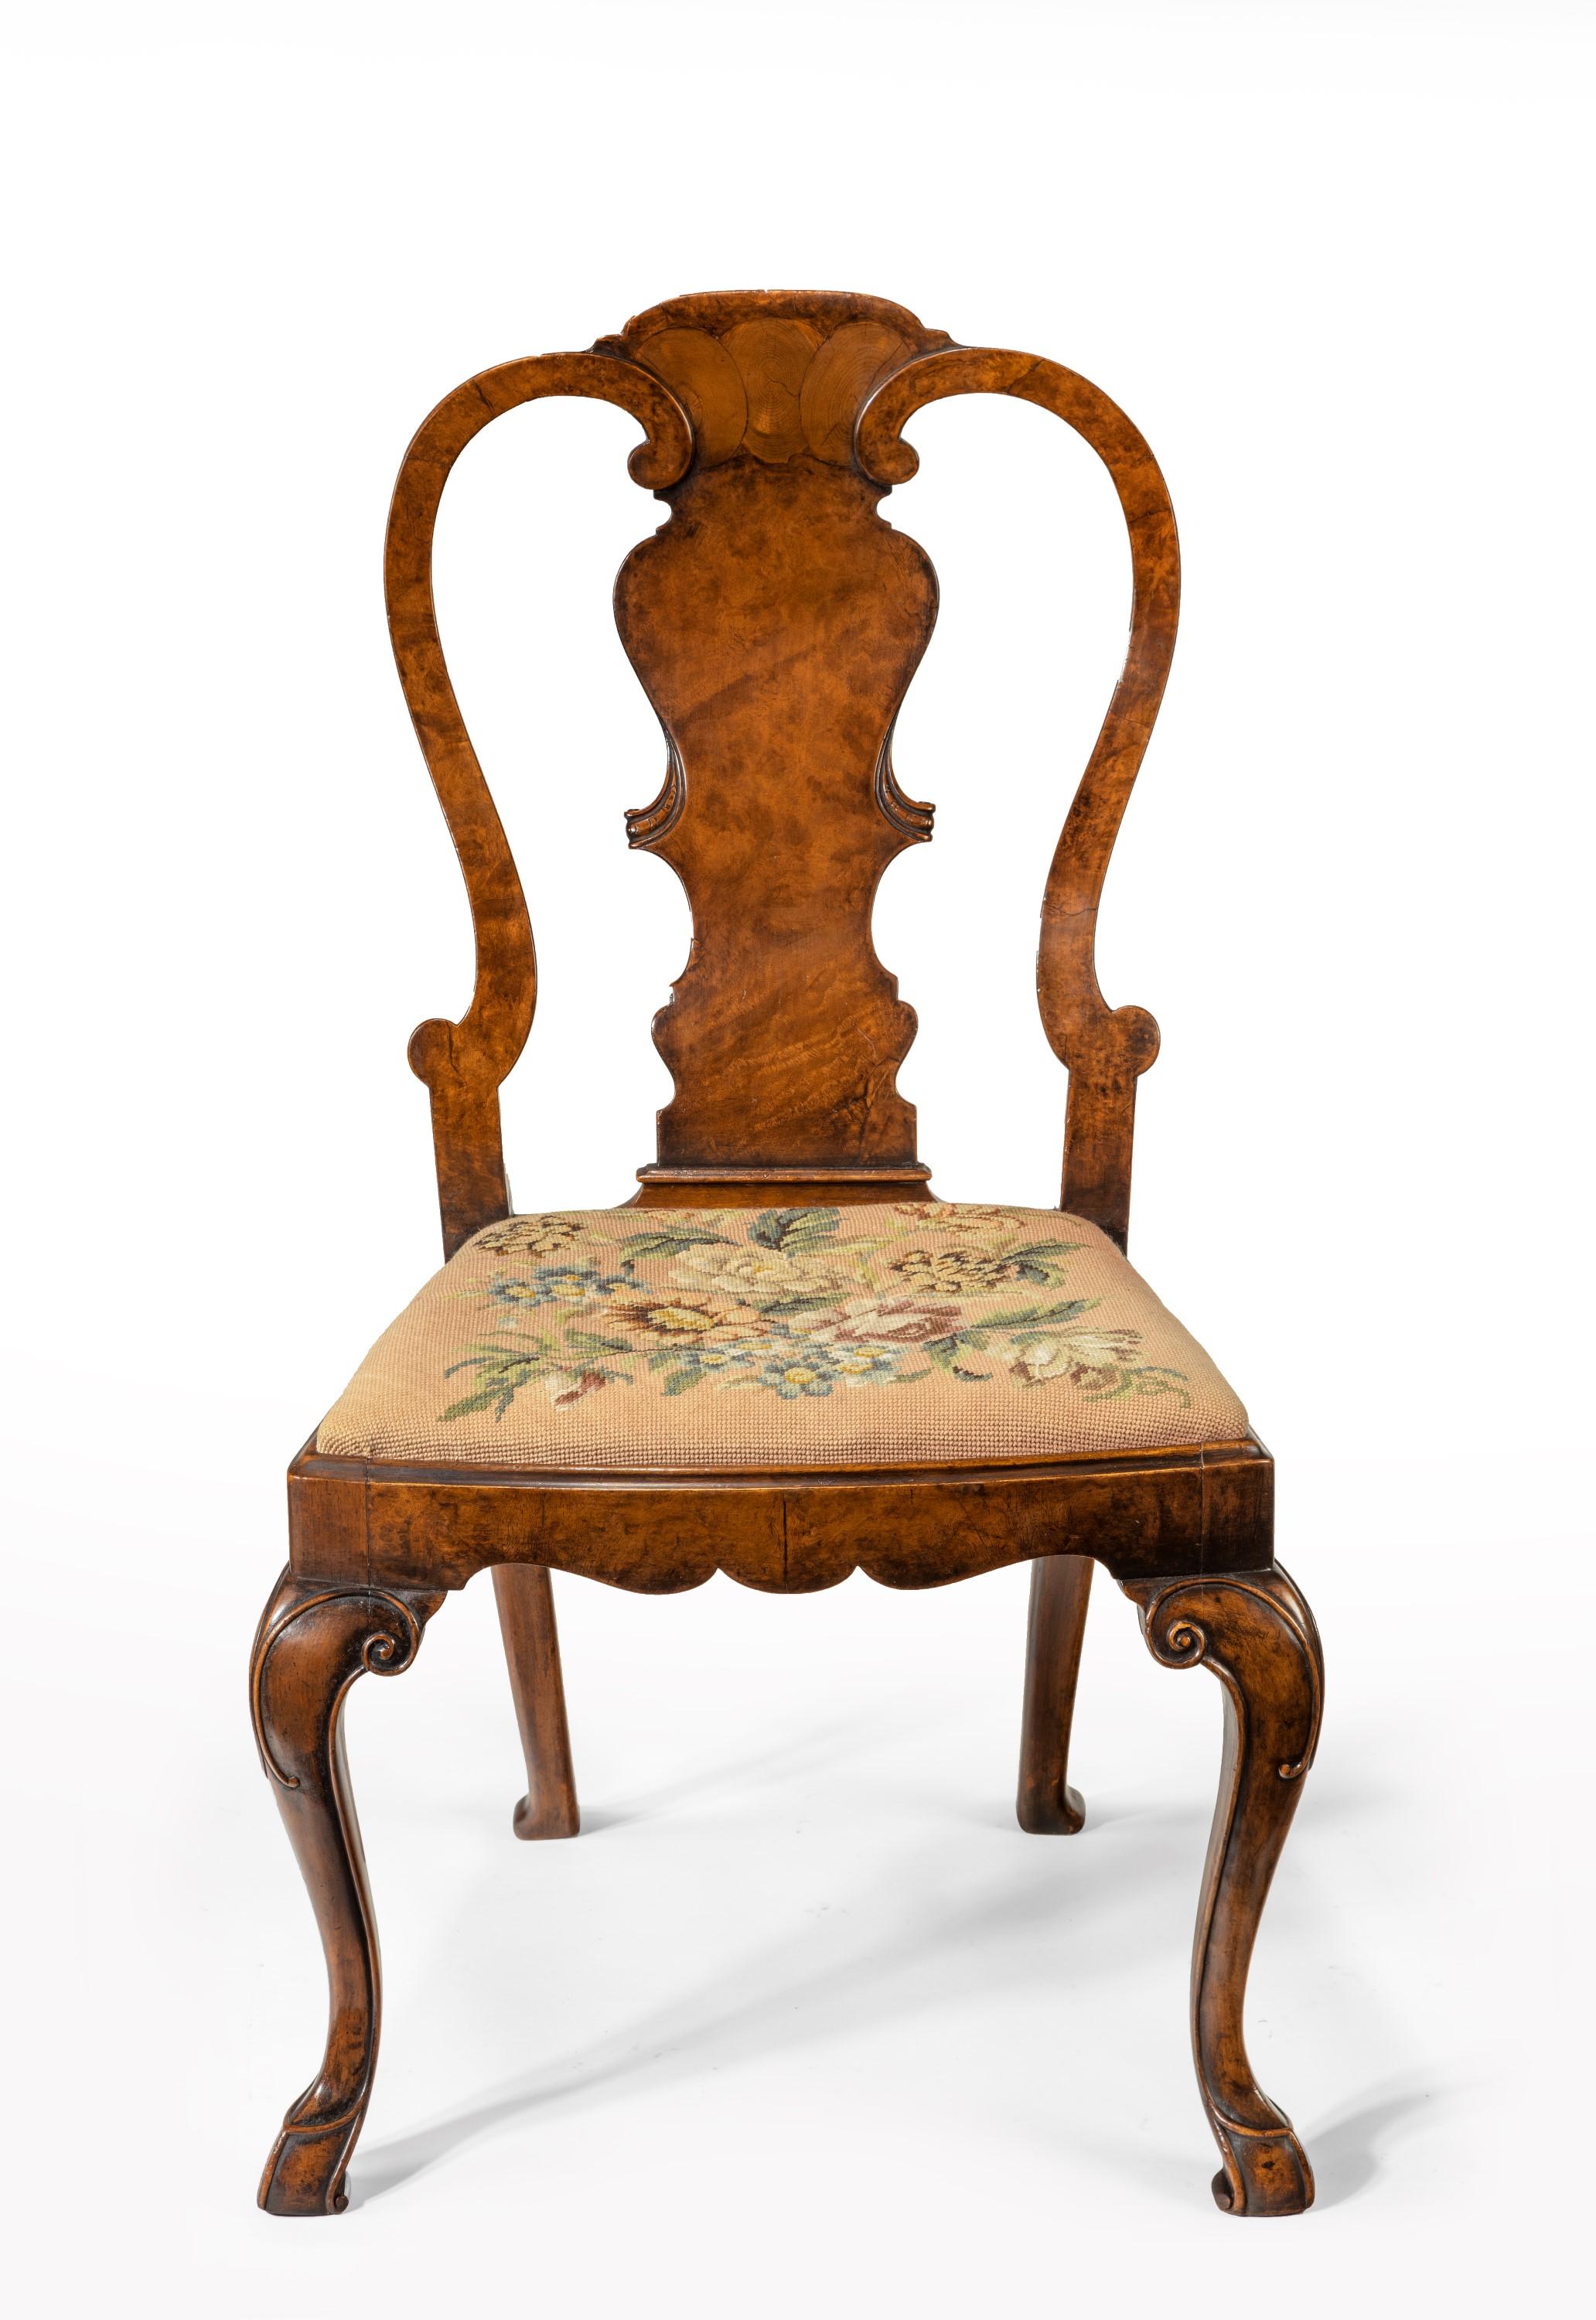 A fine quality 19th century burr walnut side chair with original needlework drop in seat in the George I style.

English, circa 1880.

The shaped top rail having an oyster veneer detail to the centre above a vase shaped splat flanked by